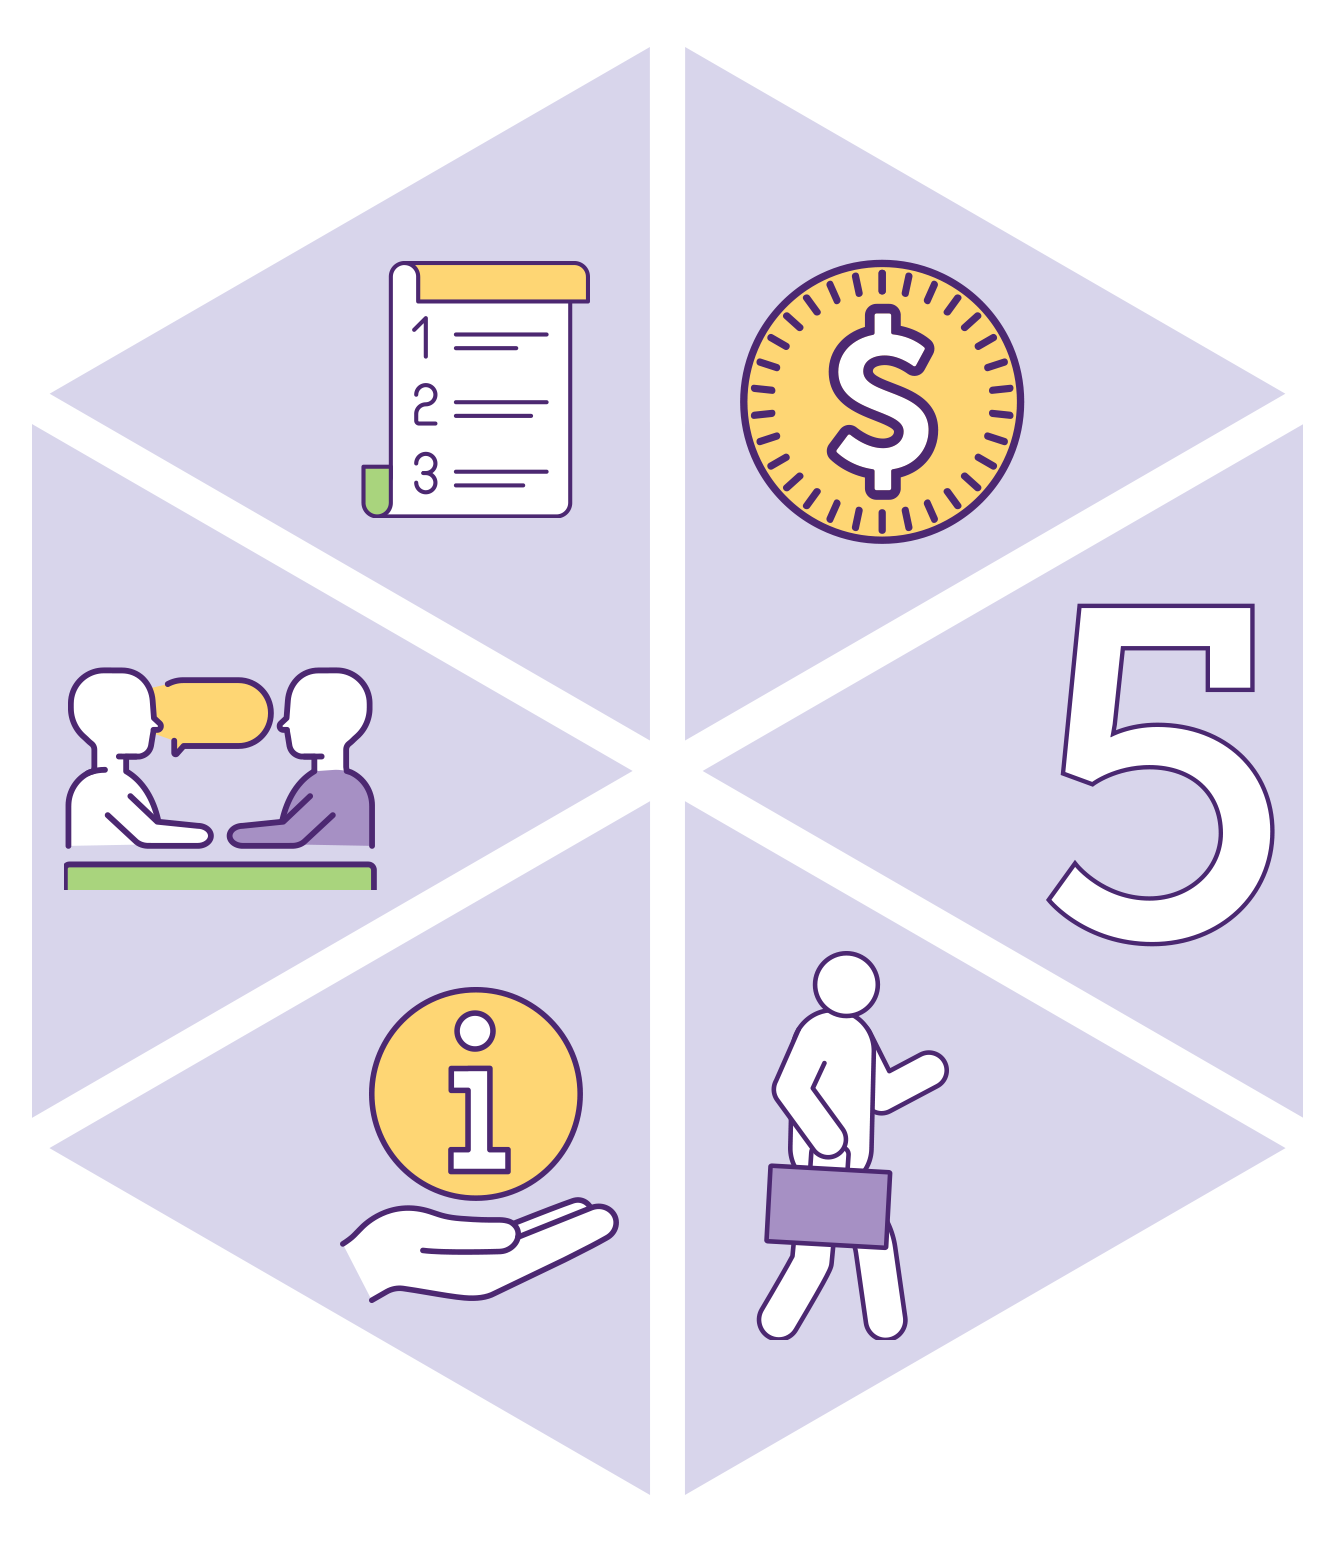 Hexagon with icons showing a checklist, dollar sign, number 5, person walking with briefcase, info sign, and people talking